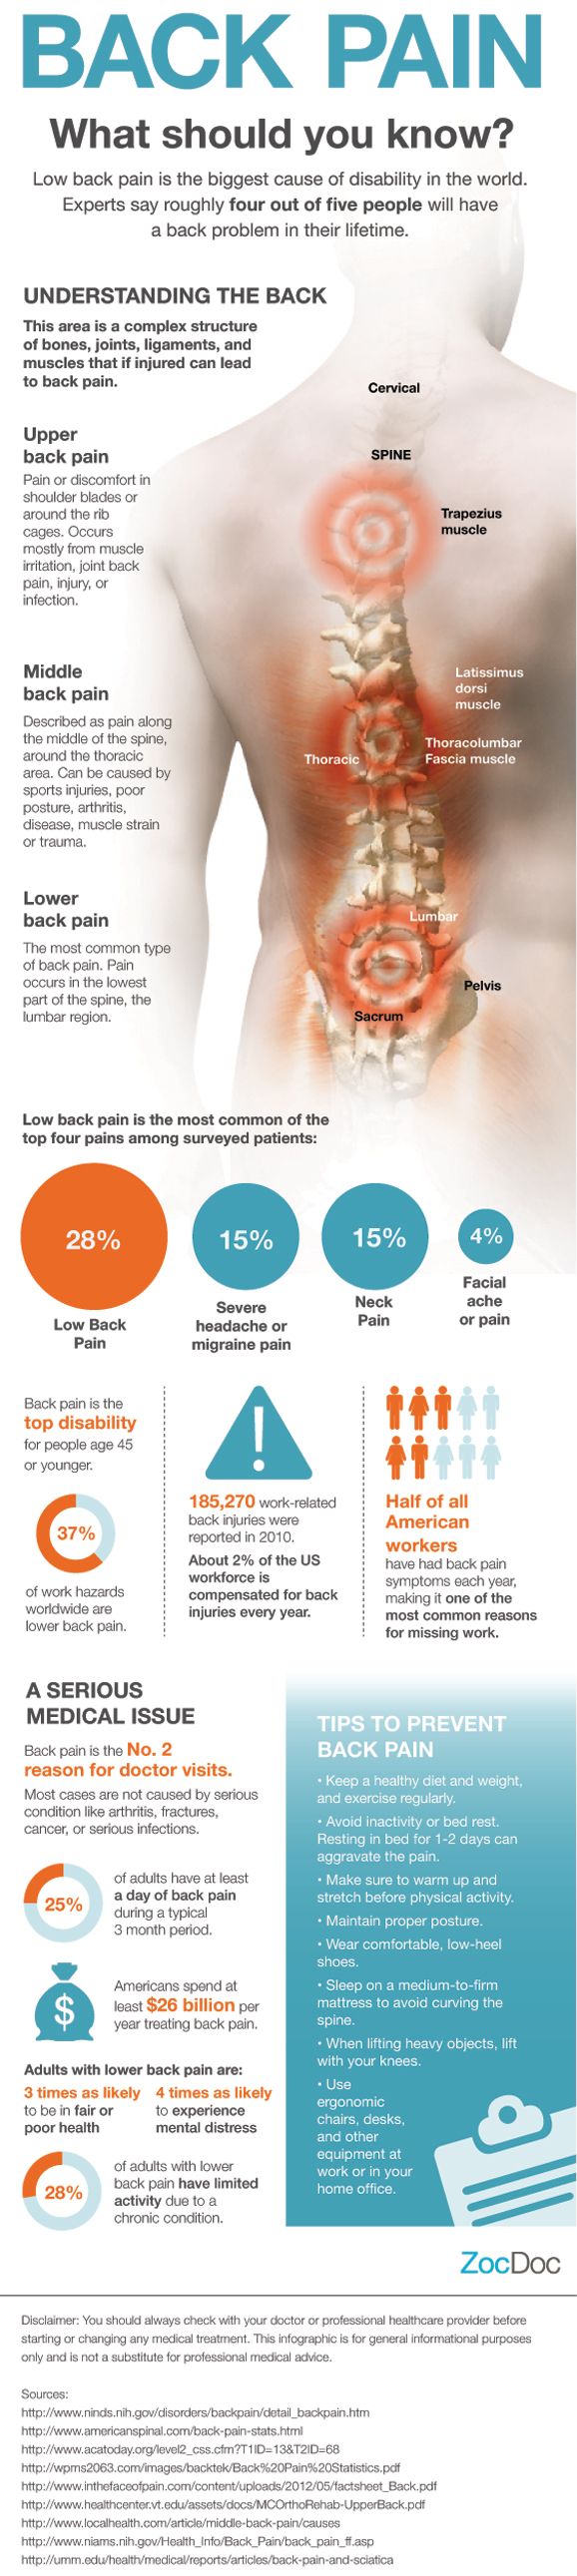 What is chronic back pain a symptom of?